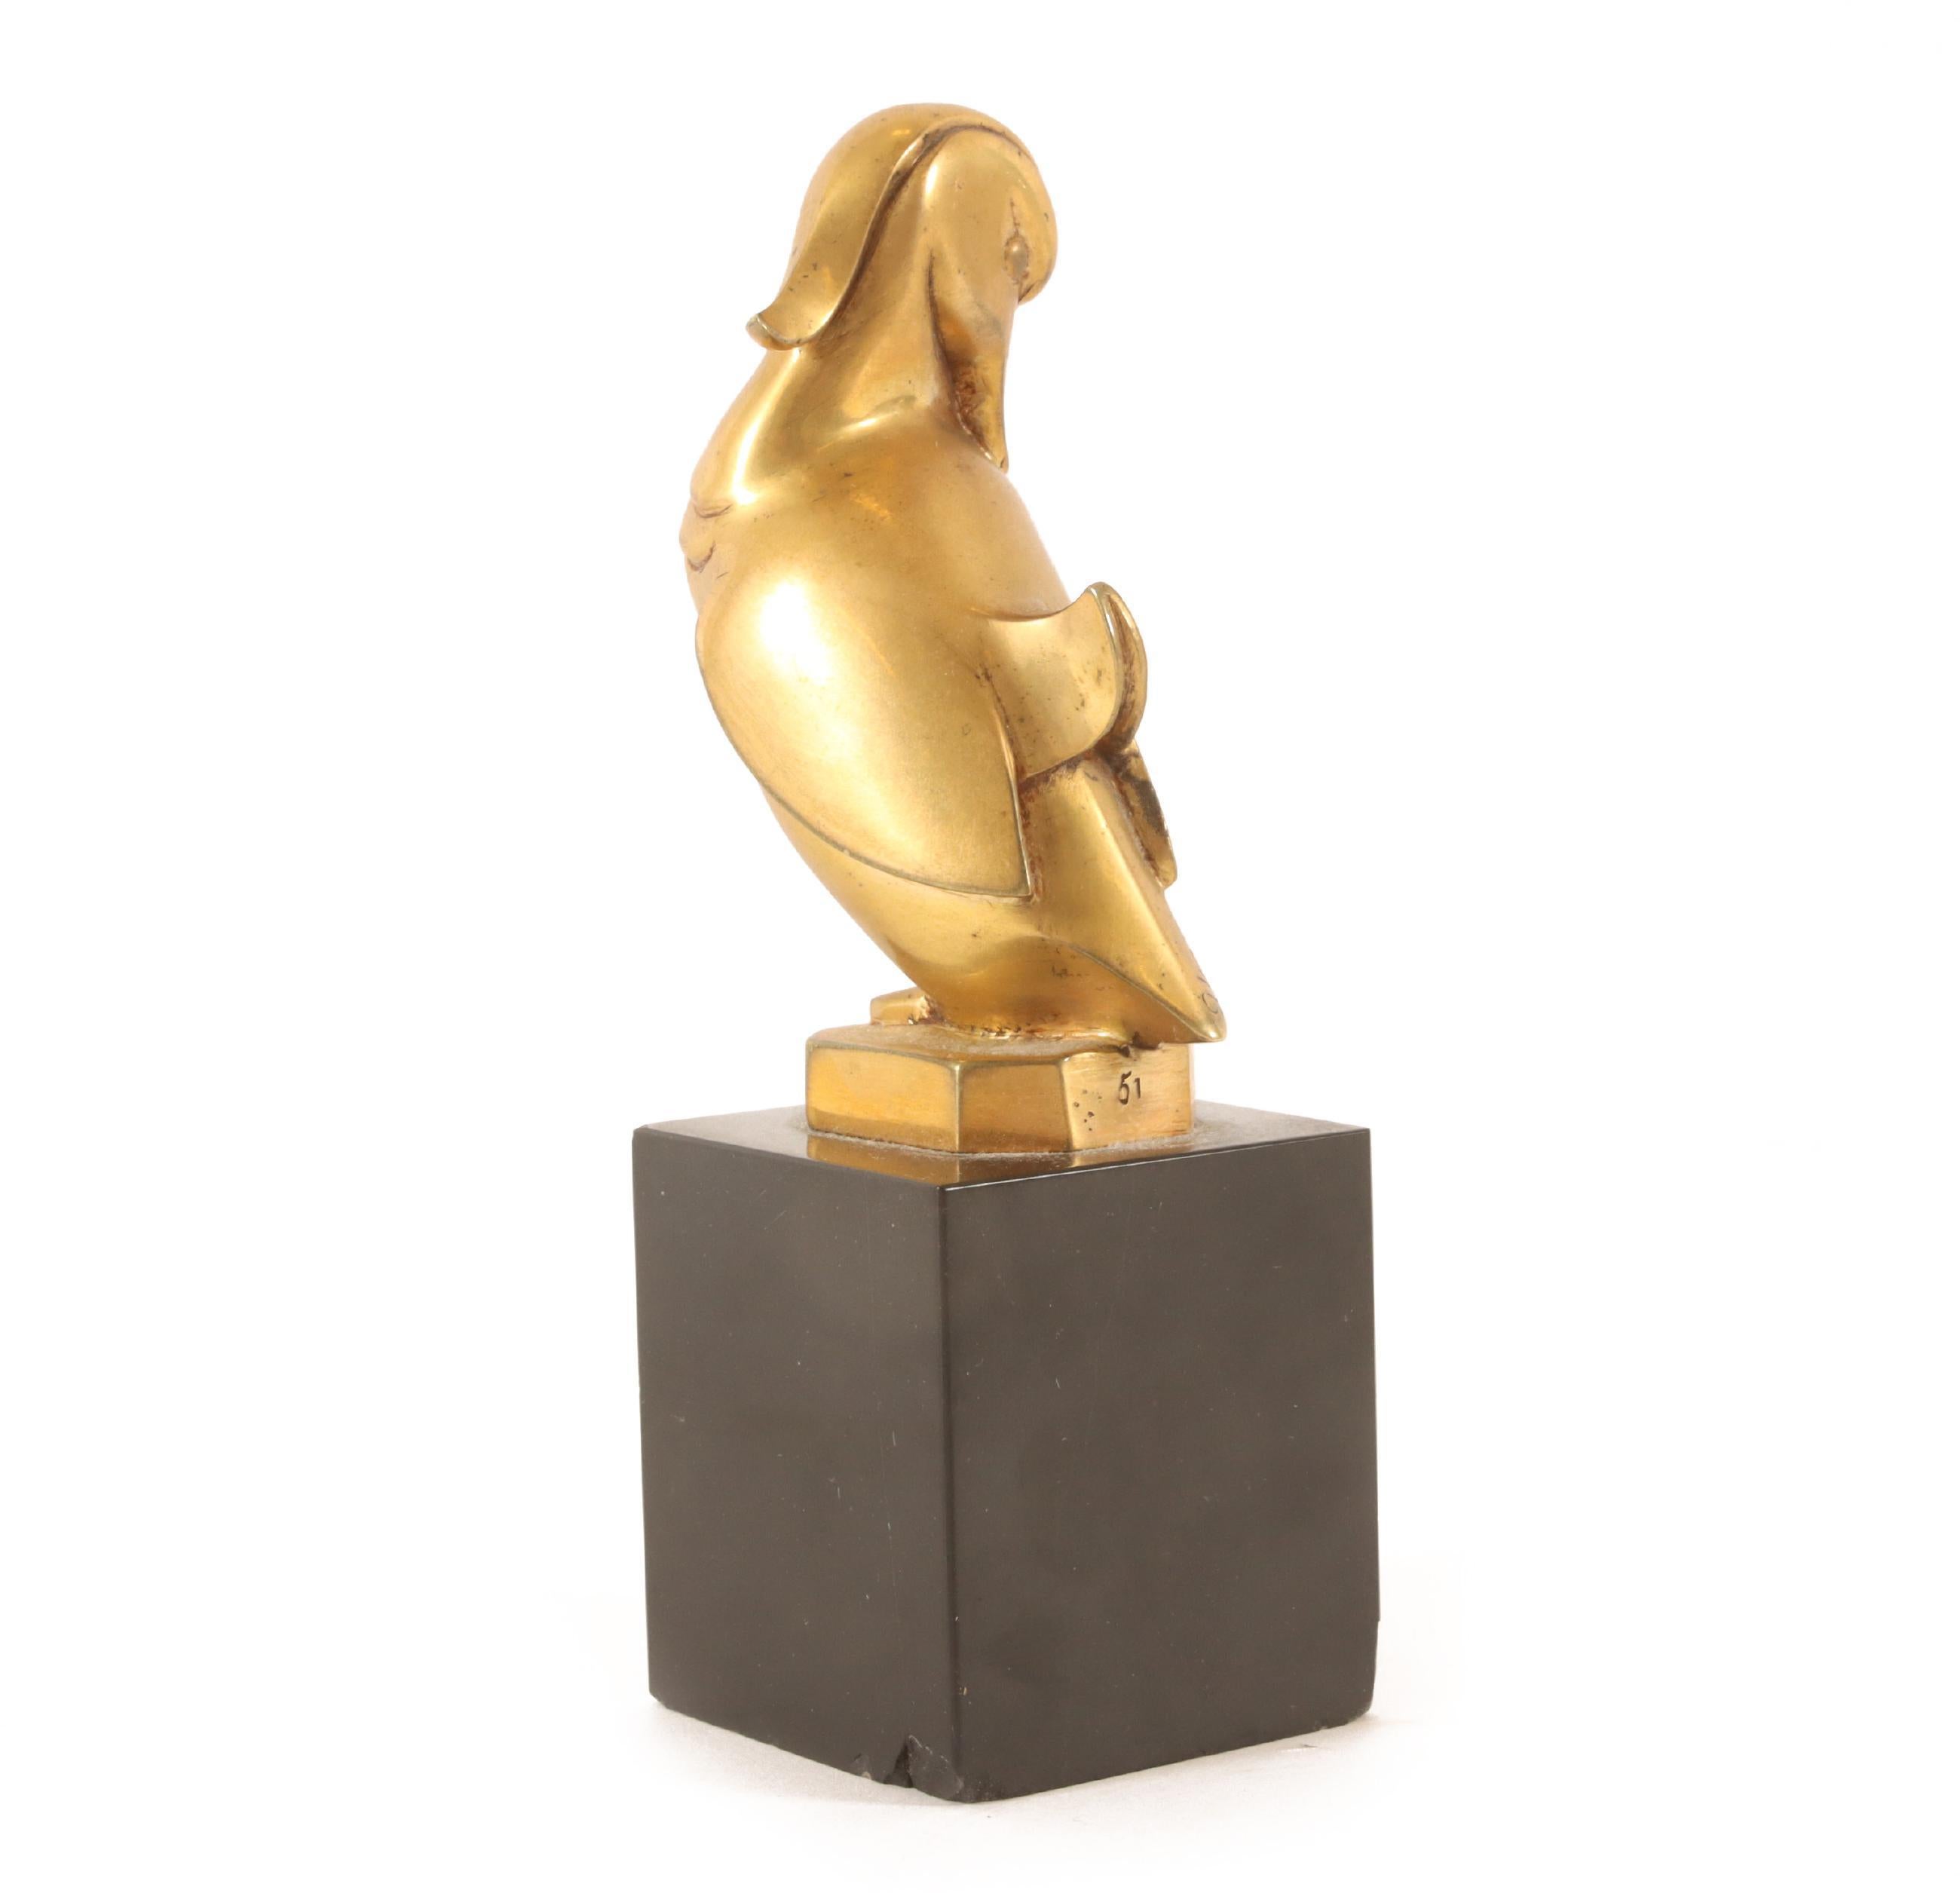 Art Deco Mandarin Duck sculpture in brass by Georges H. Laurent.. The sculpture is signed G.H:laurent, number 51,. The bird mounted over a black brown portoro marble base (with one small damage on the base corners). A refined example from the Art